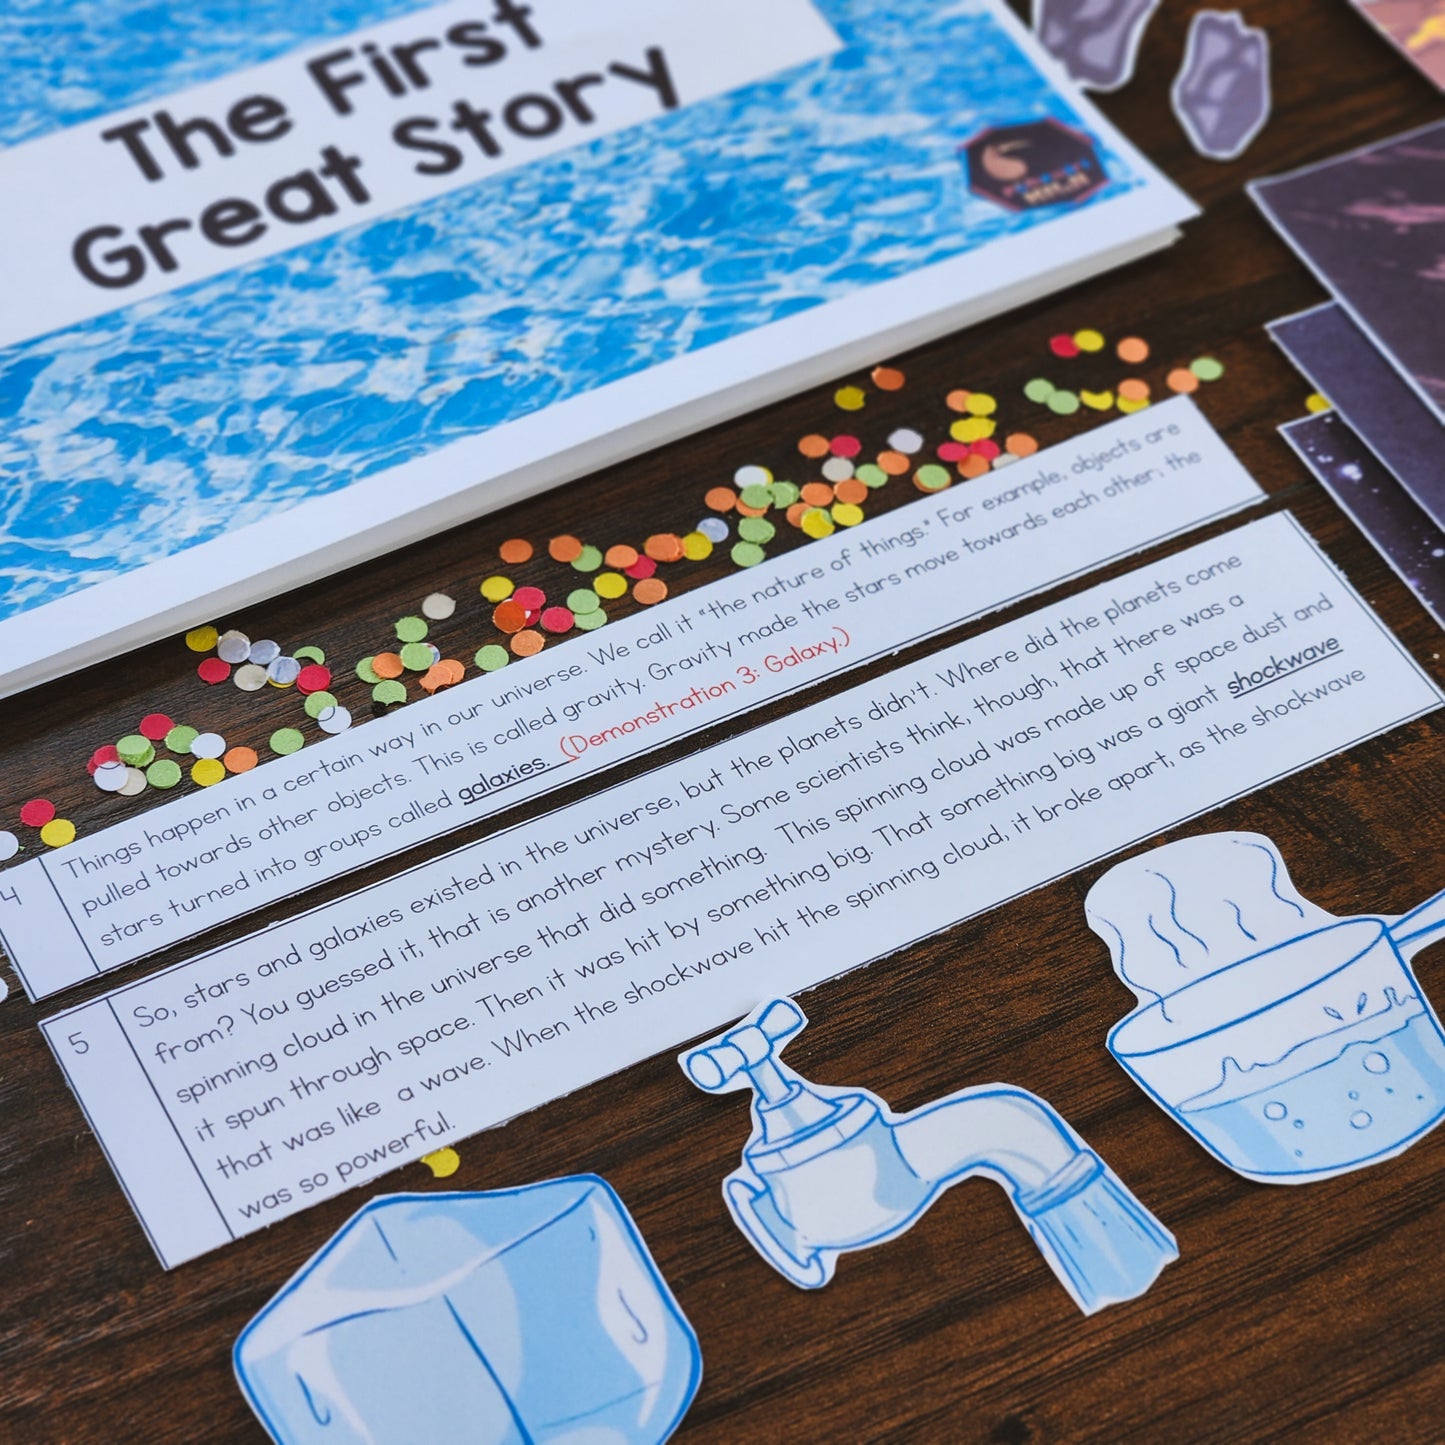 Montessori First Great Story Script and Powerpoint (cosmic) - montessorikiwi